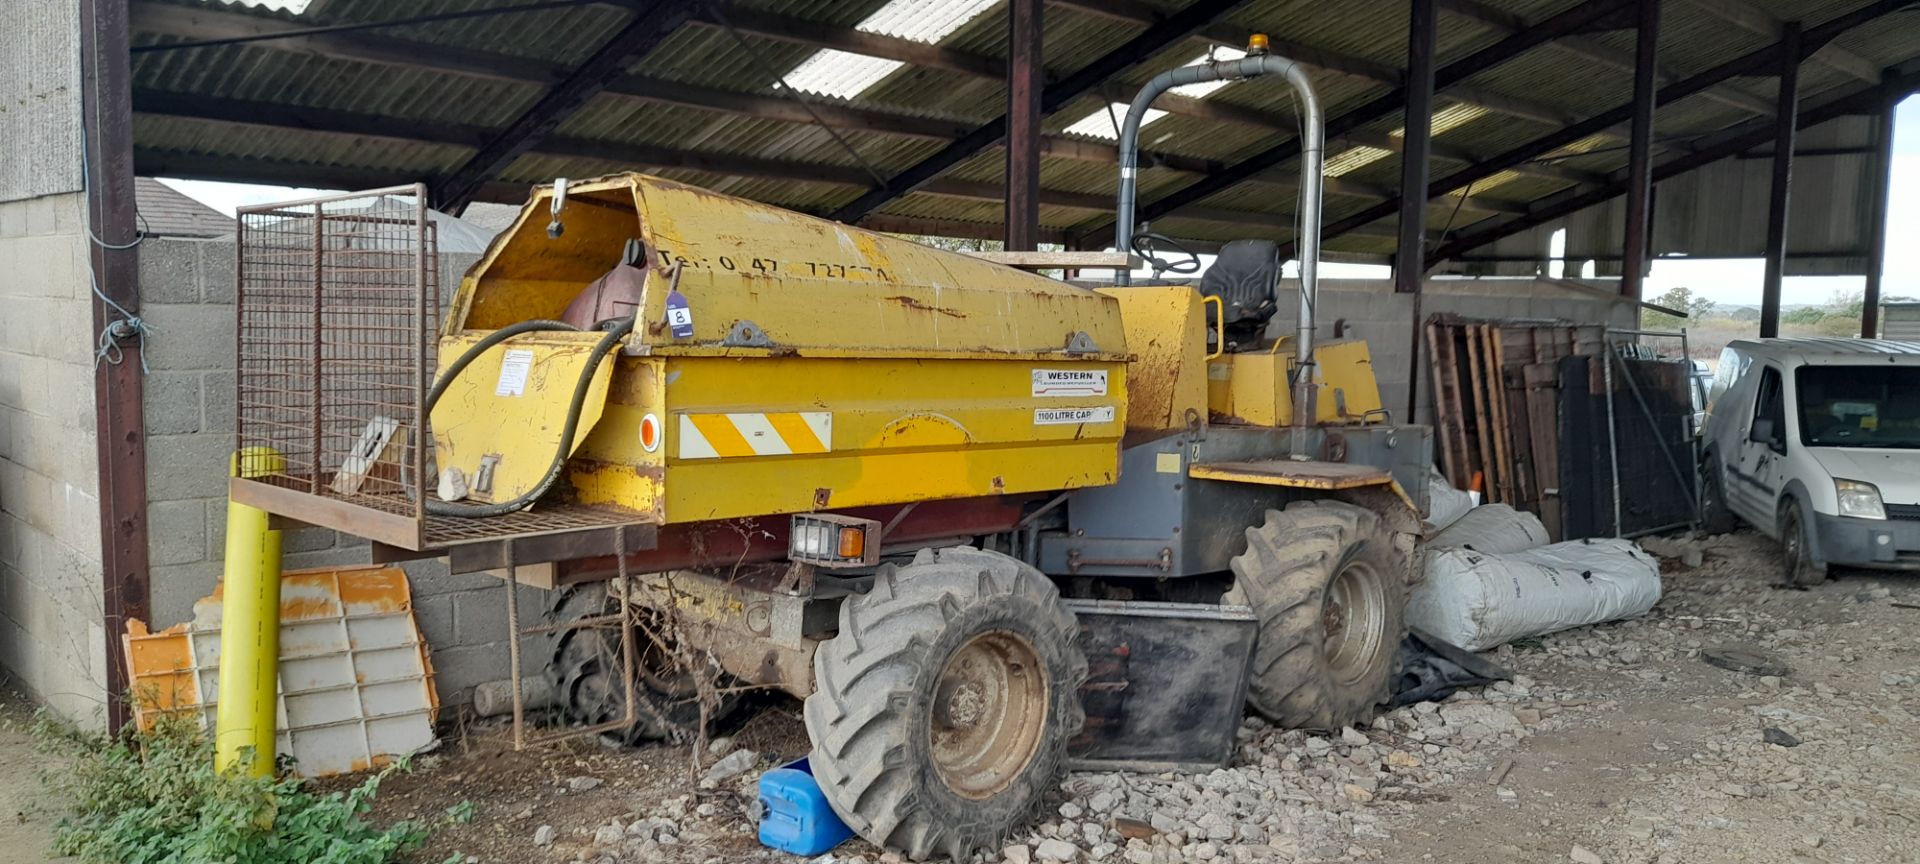 Newson 6 Tonne Dumper converted to mobile fuel dowser – Spares or Repair